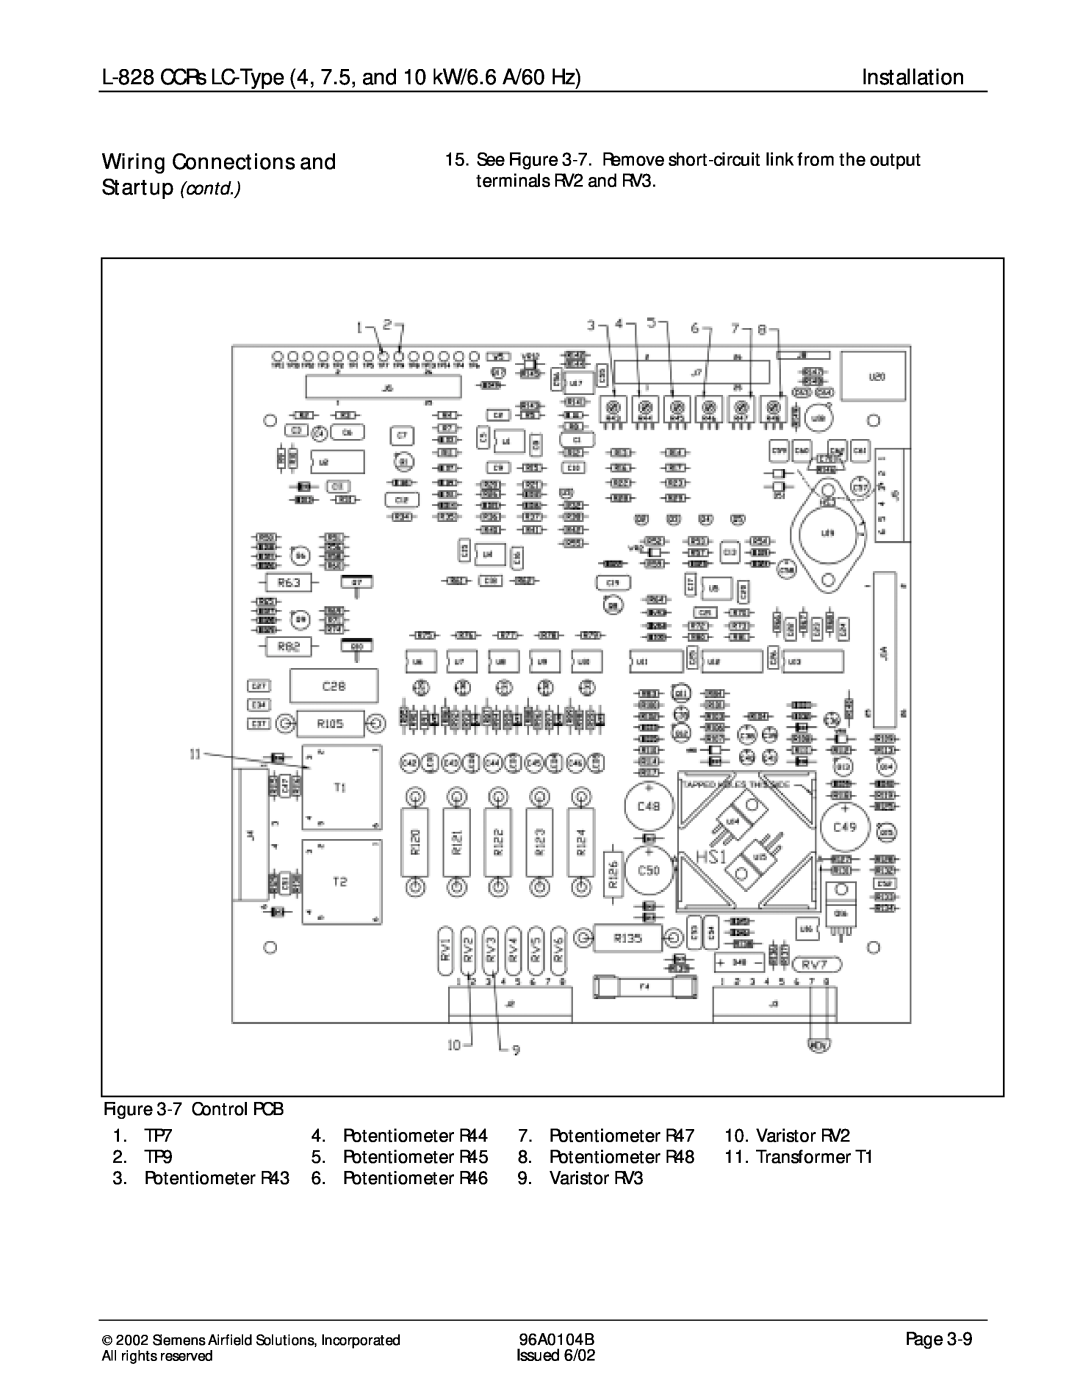 Siemens manual Wiring Connections and, Startup contd, L-828CCRs LC-Type4, 7.5, and 10 kW/6.6 A/60 Hz, Installation 